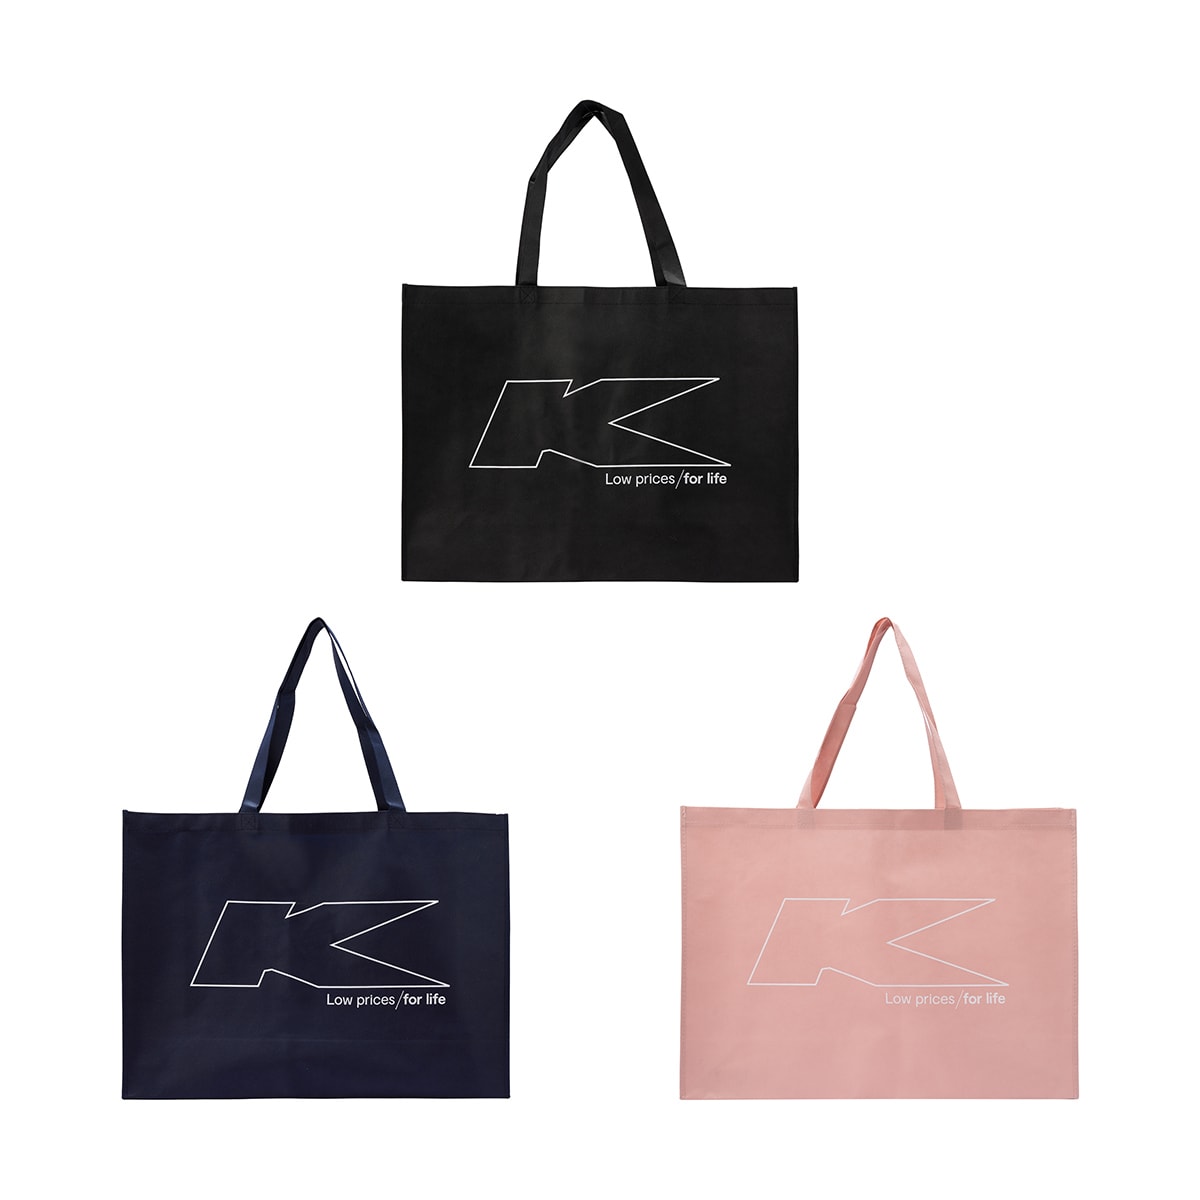 Kmart Tote Bags for Sale | Redbubble